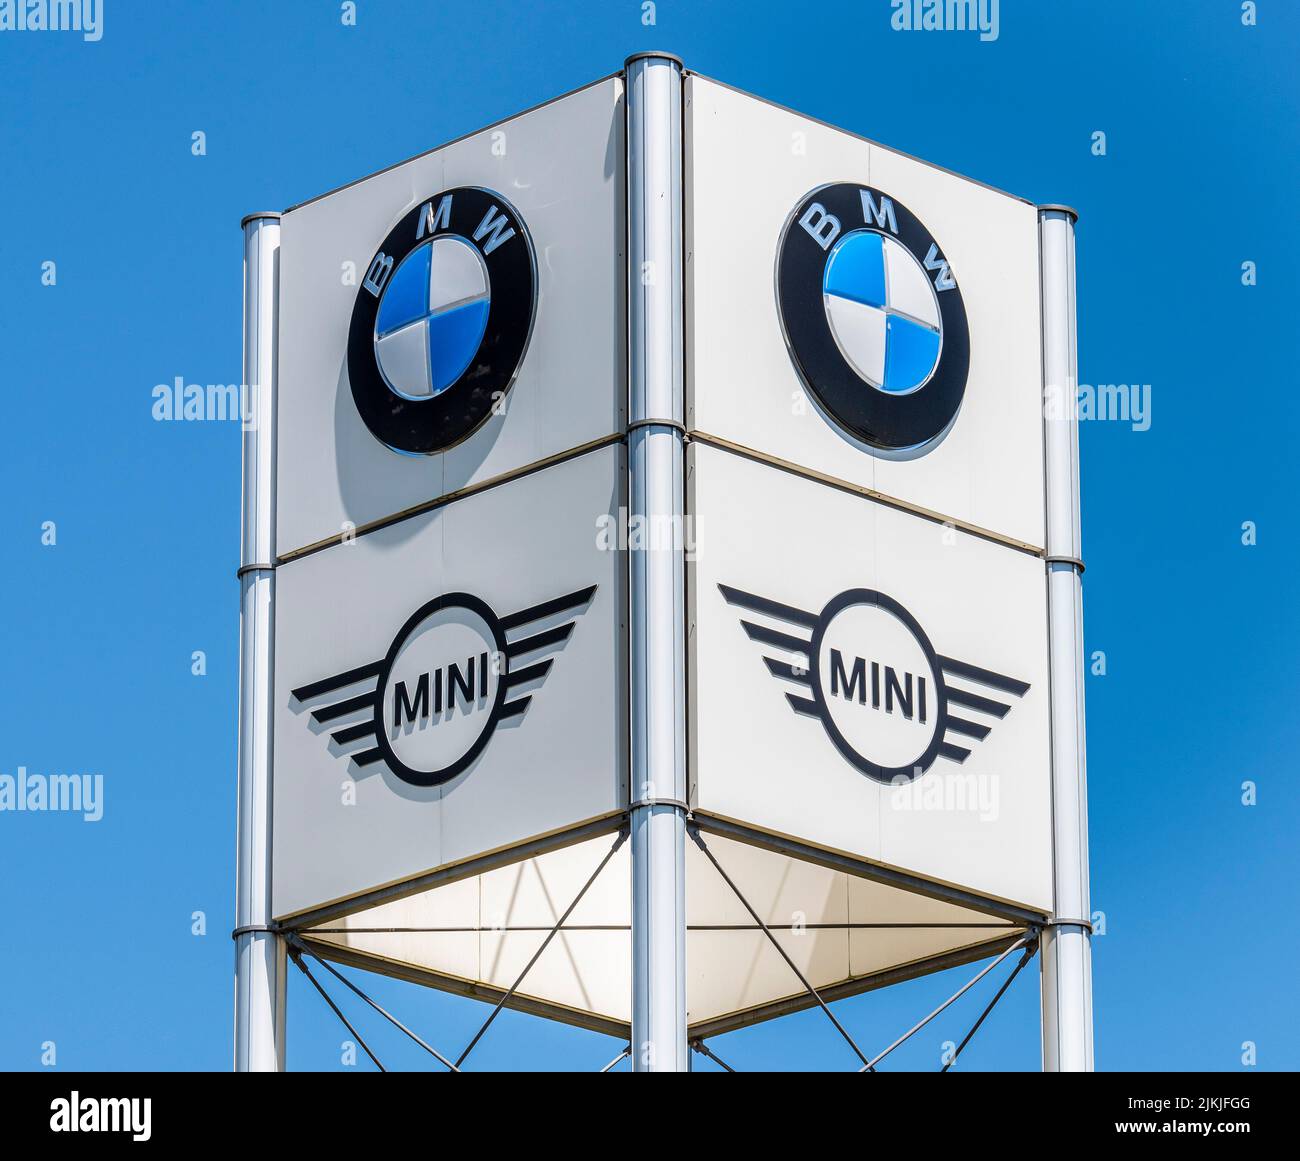 Advertising sign of the company BMW Stock Photo